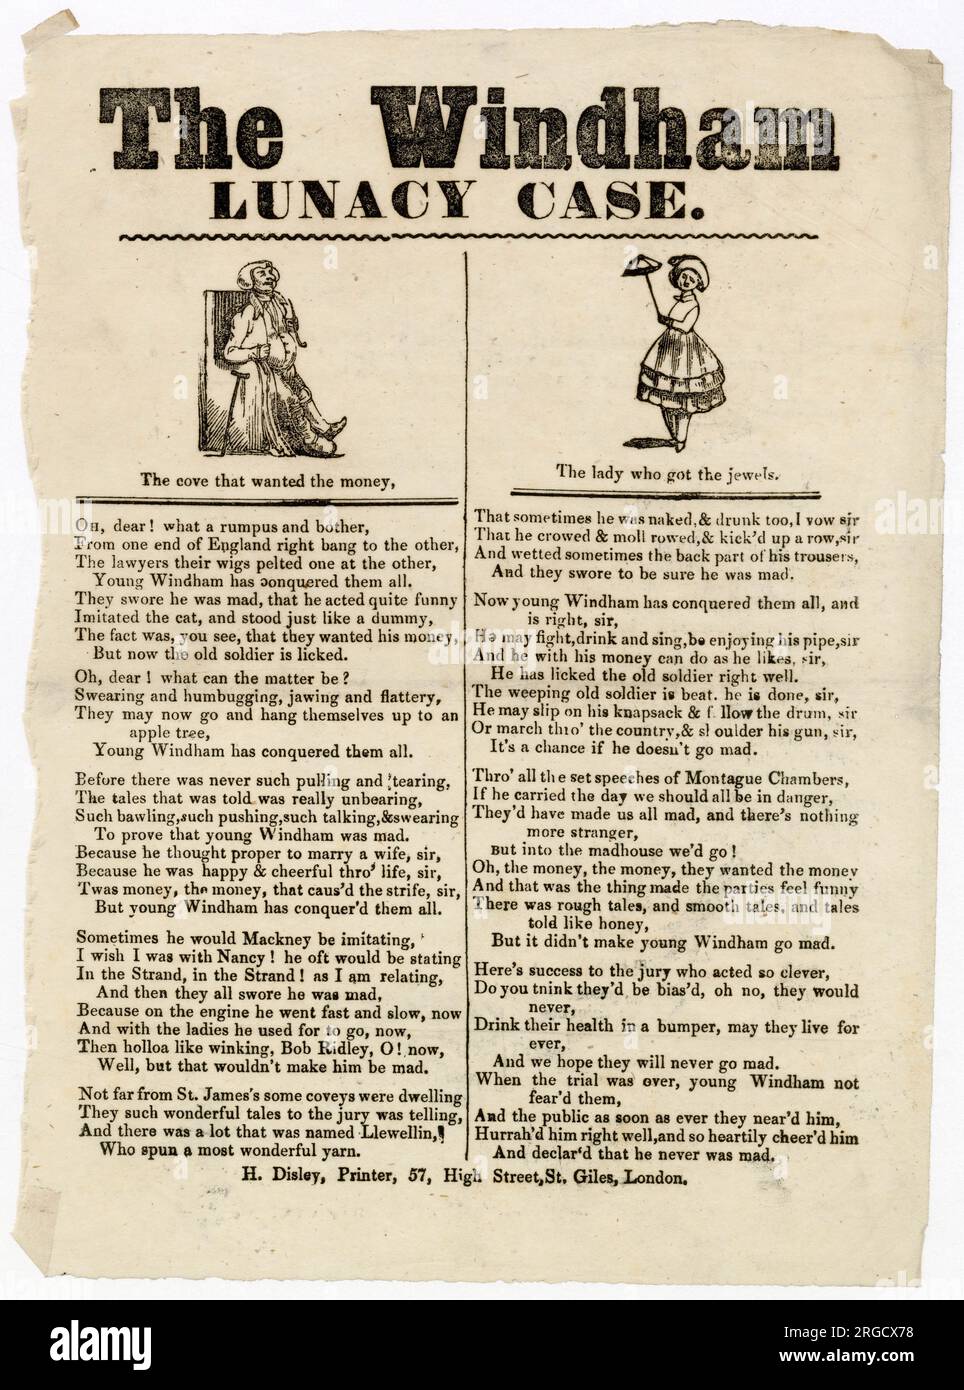 The Windham Lunacy Case. Ballad about and in support of William Frederick Windham (1840 - 1866), the heir to Felbrigg Hall in the county of Norfolk, England. In 1861–62, he was the subject of a lunacy case after he married Anne Agnes Willoughby, of whom his uncle, General Charles Ash Windham, did not approve, causing his family to claim that he was incapable of managing his affairs. Windham won the case in a ruling that characterised him as eccentric rather than a lunatic. Stock Photo